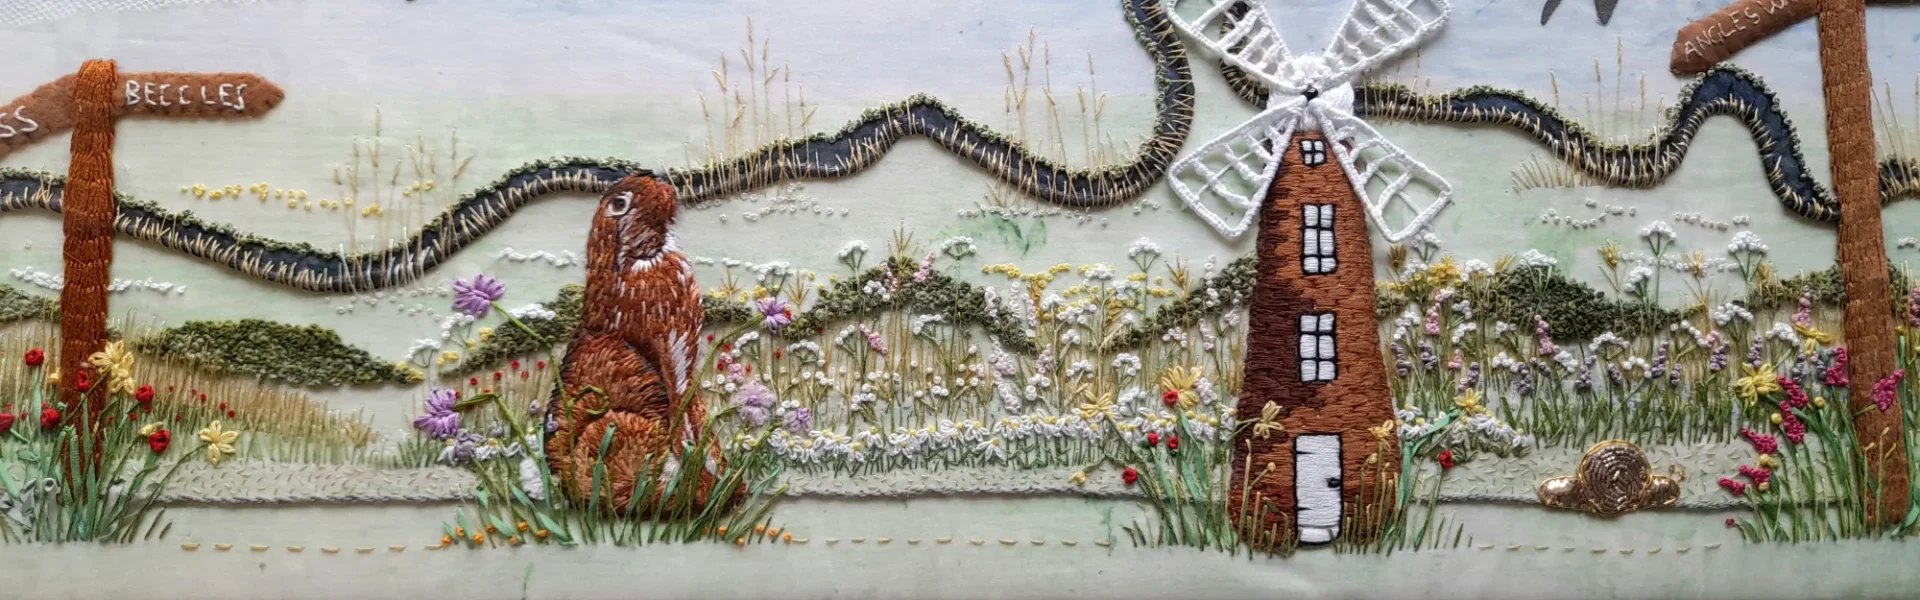 Final assessment piece by Hand Embroidery graduate Teresa Miller explains how she has learnt different way to generate design ideas.